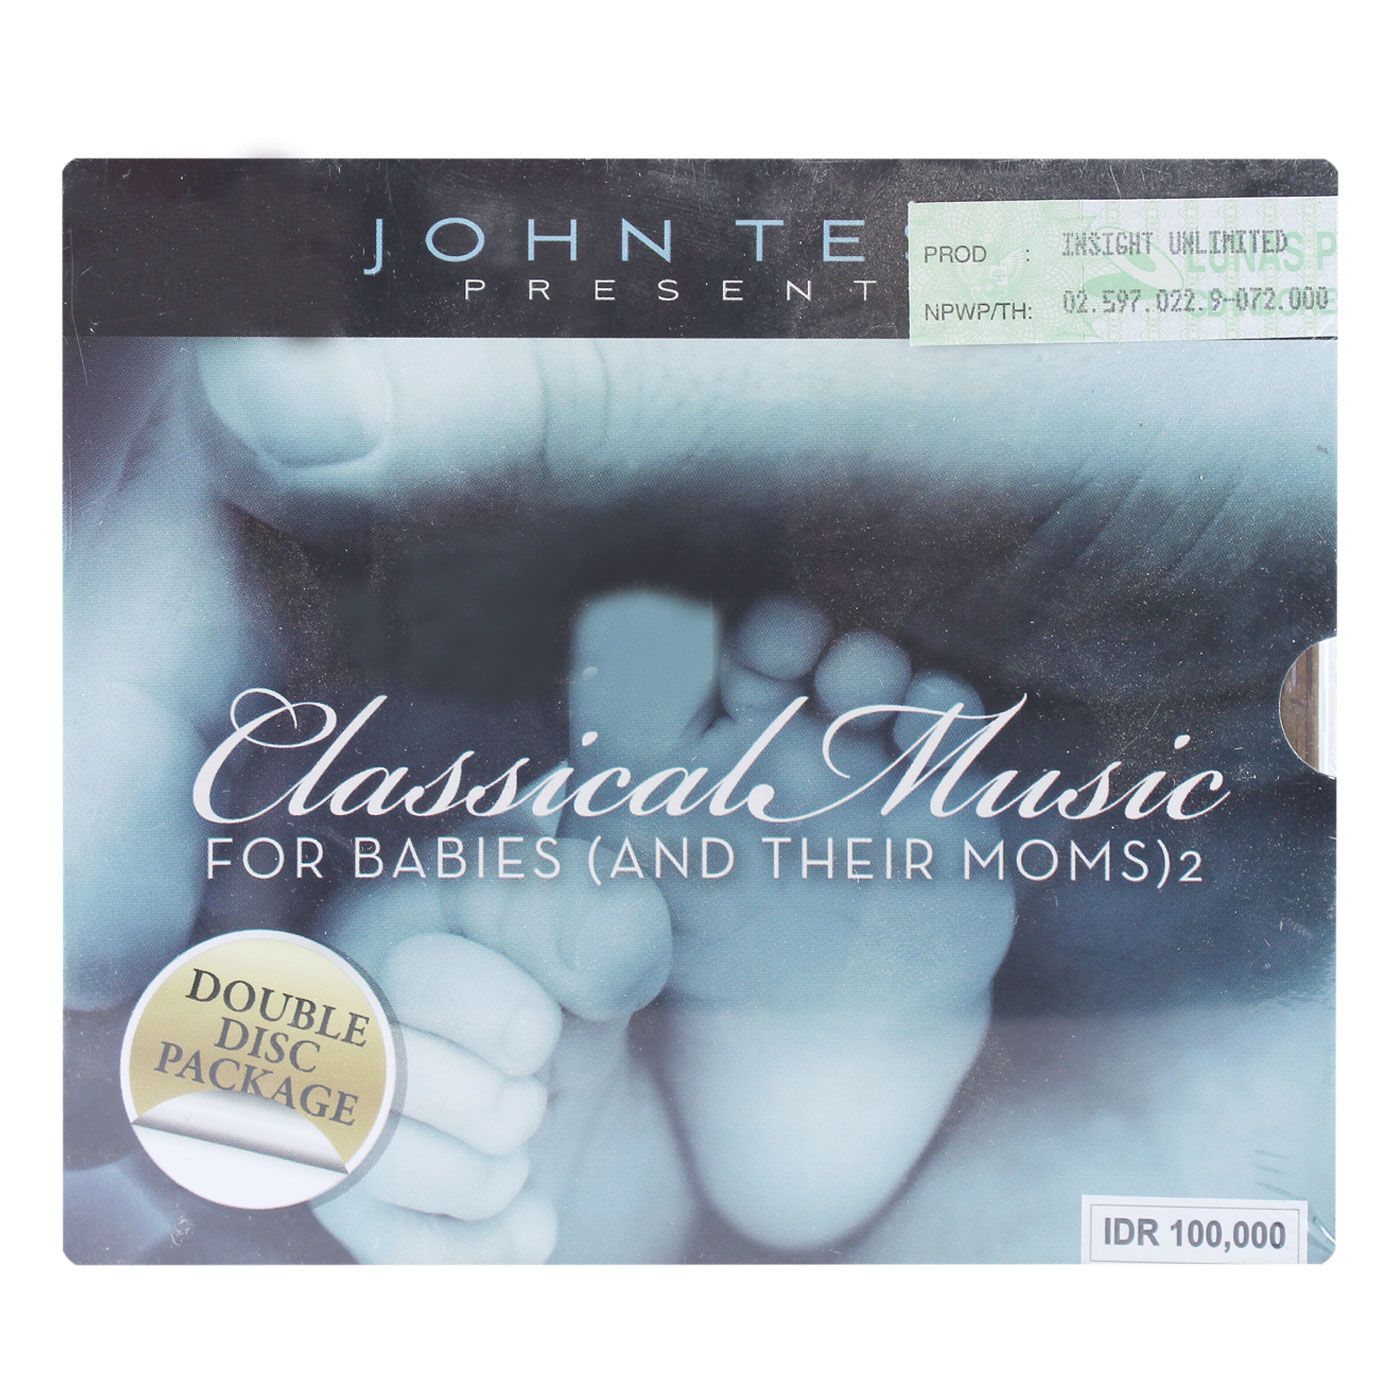 EMI CMG Classical Music For Babies And Their Moms Package - 2